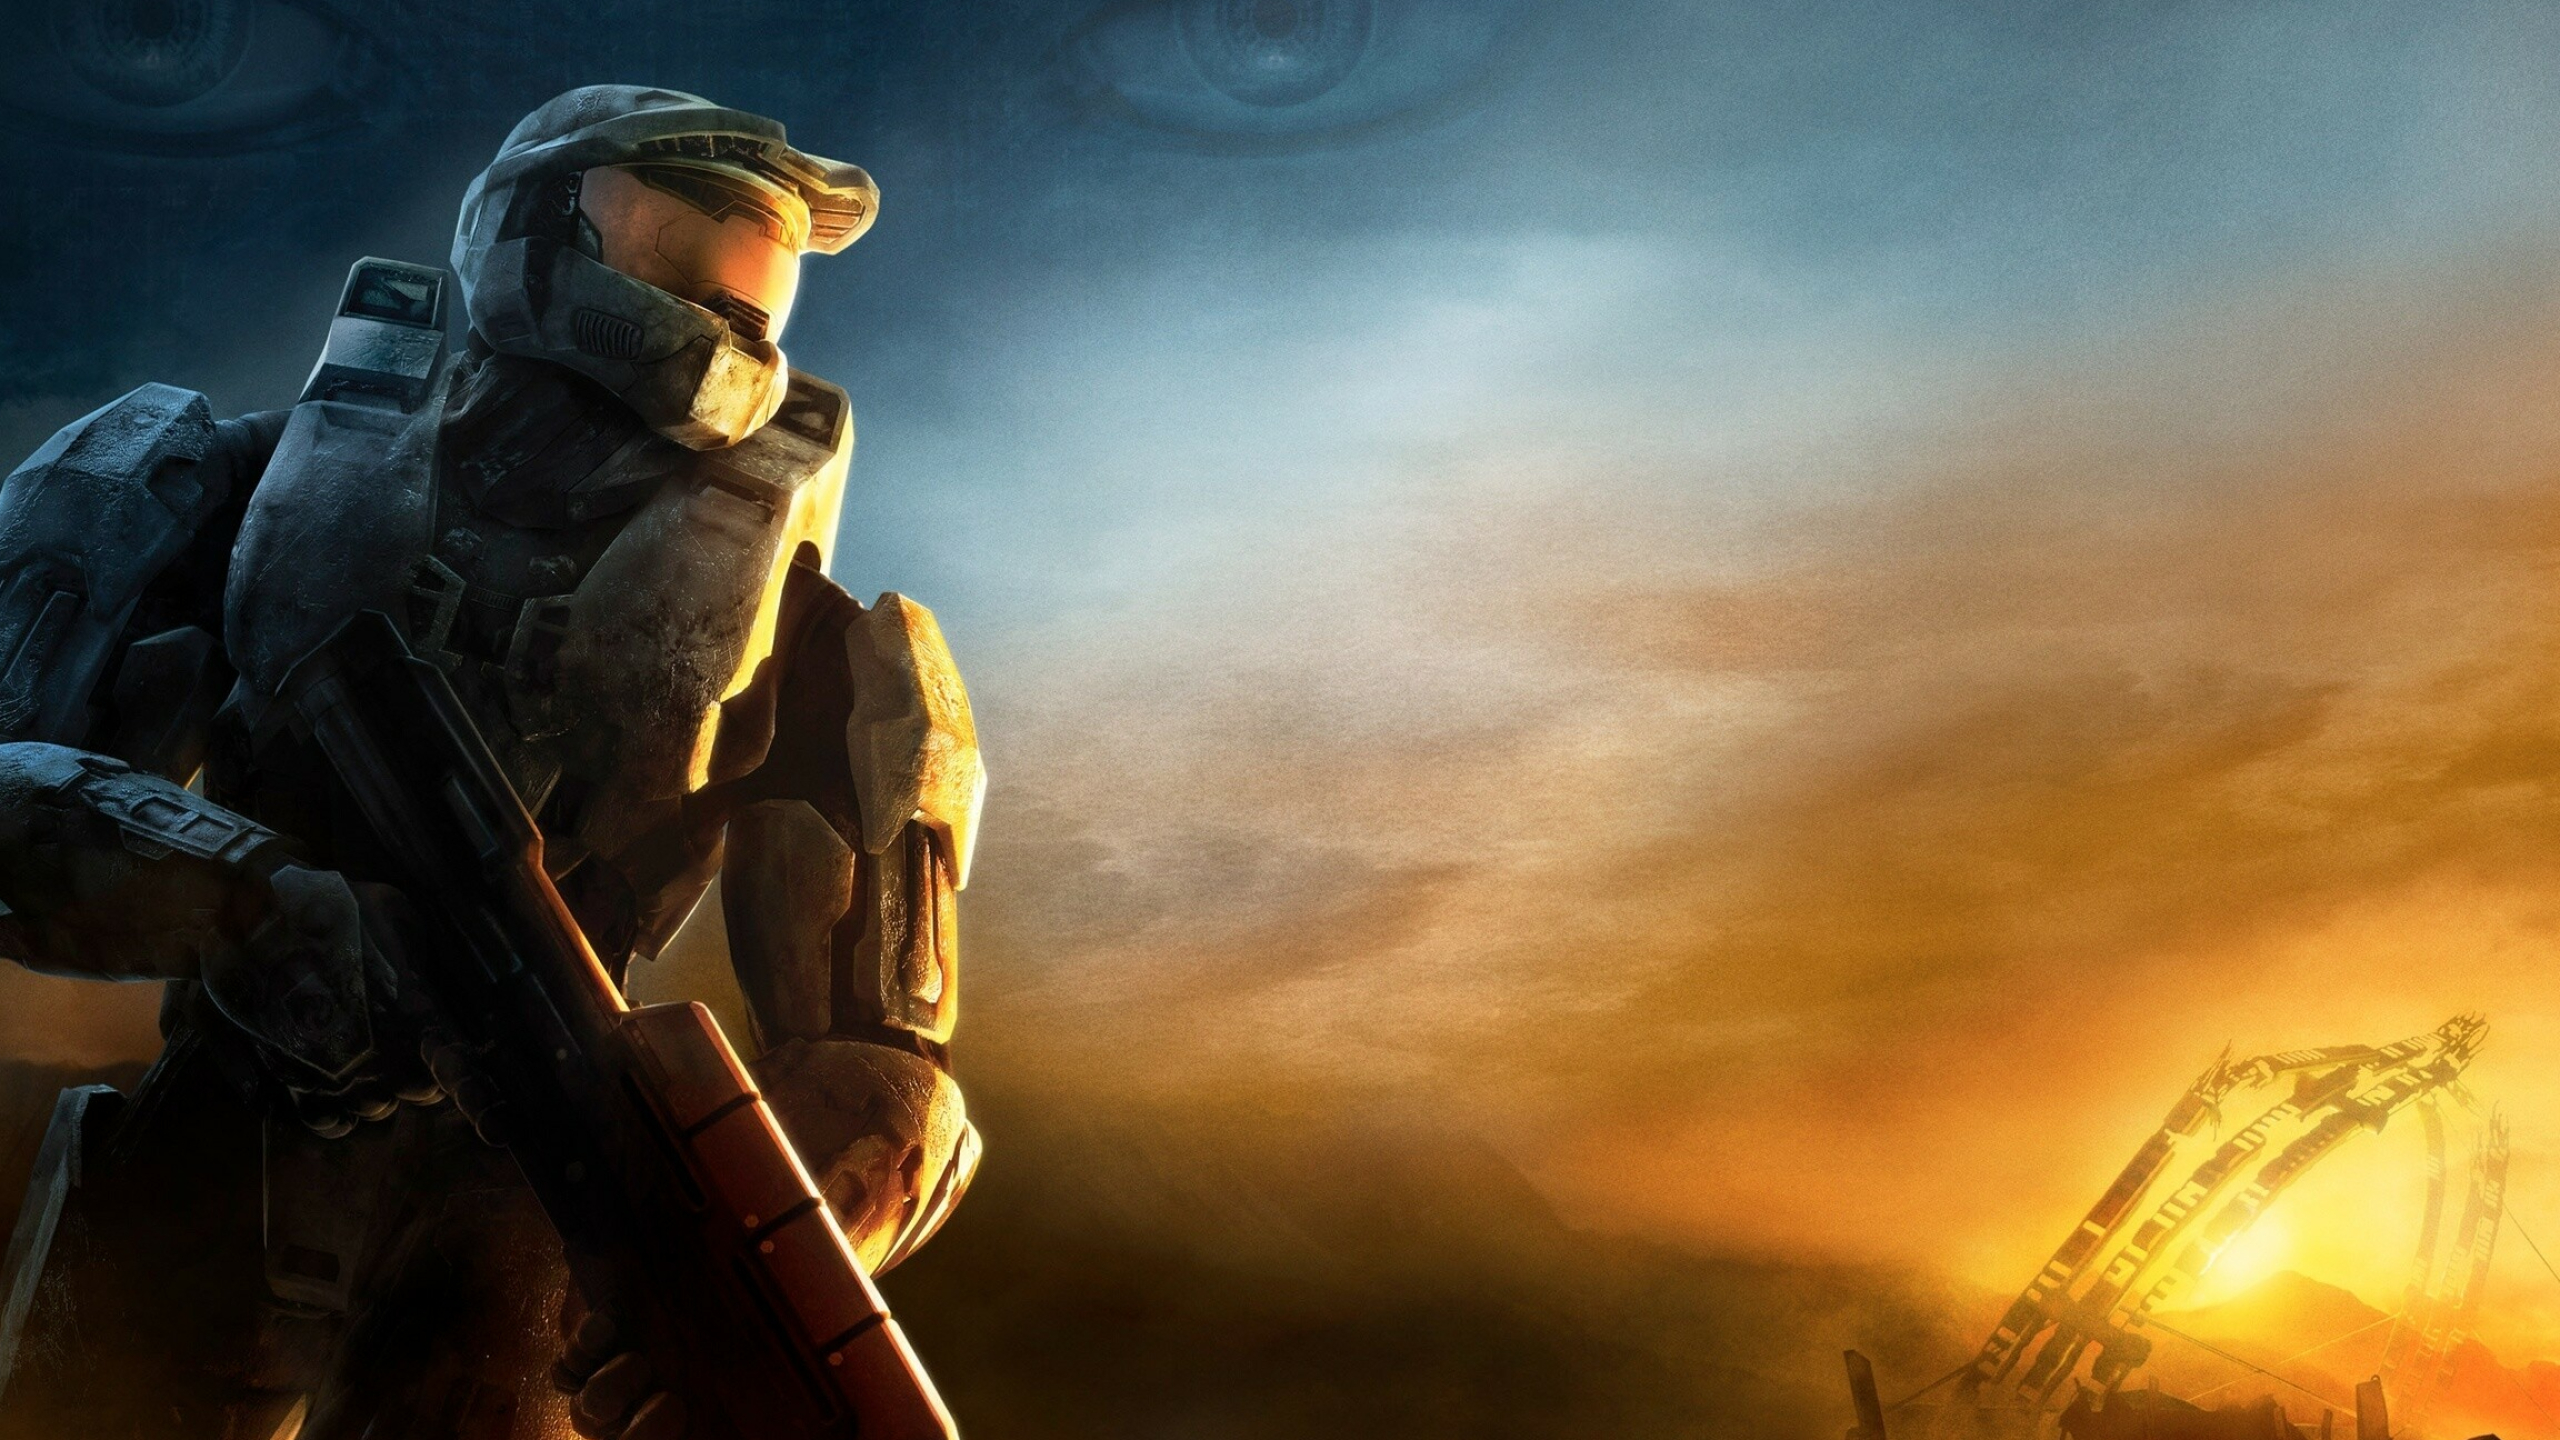 Halo: In the Forerunner-Precursor war, the Forerunners destroyed their creators. 2560x1440 HD Wallpaper.